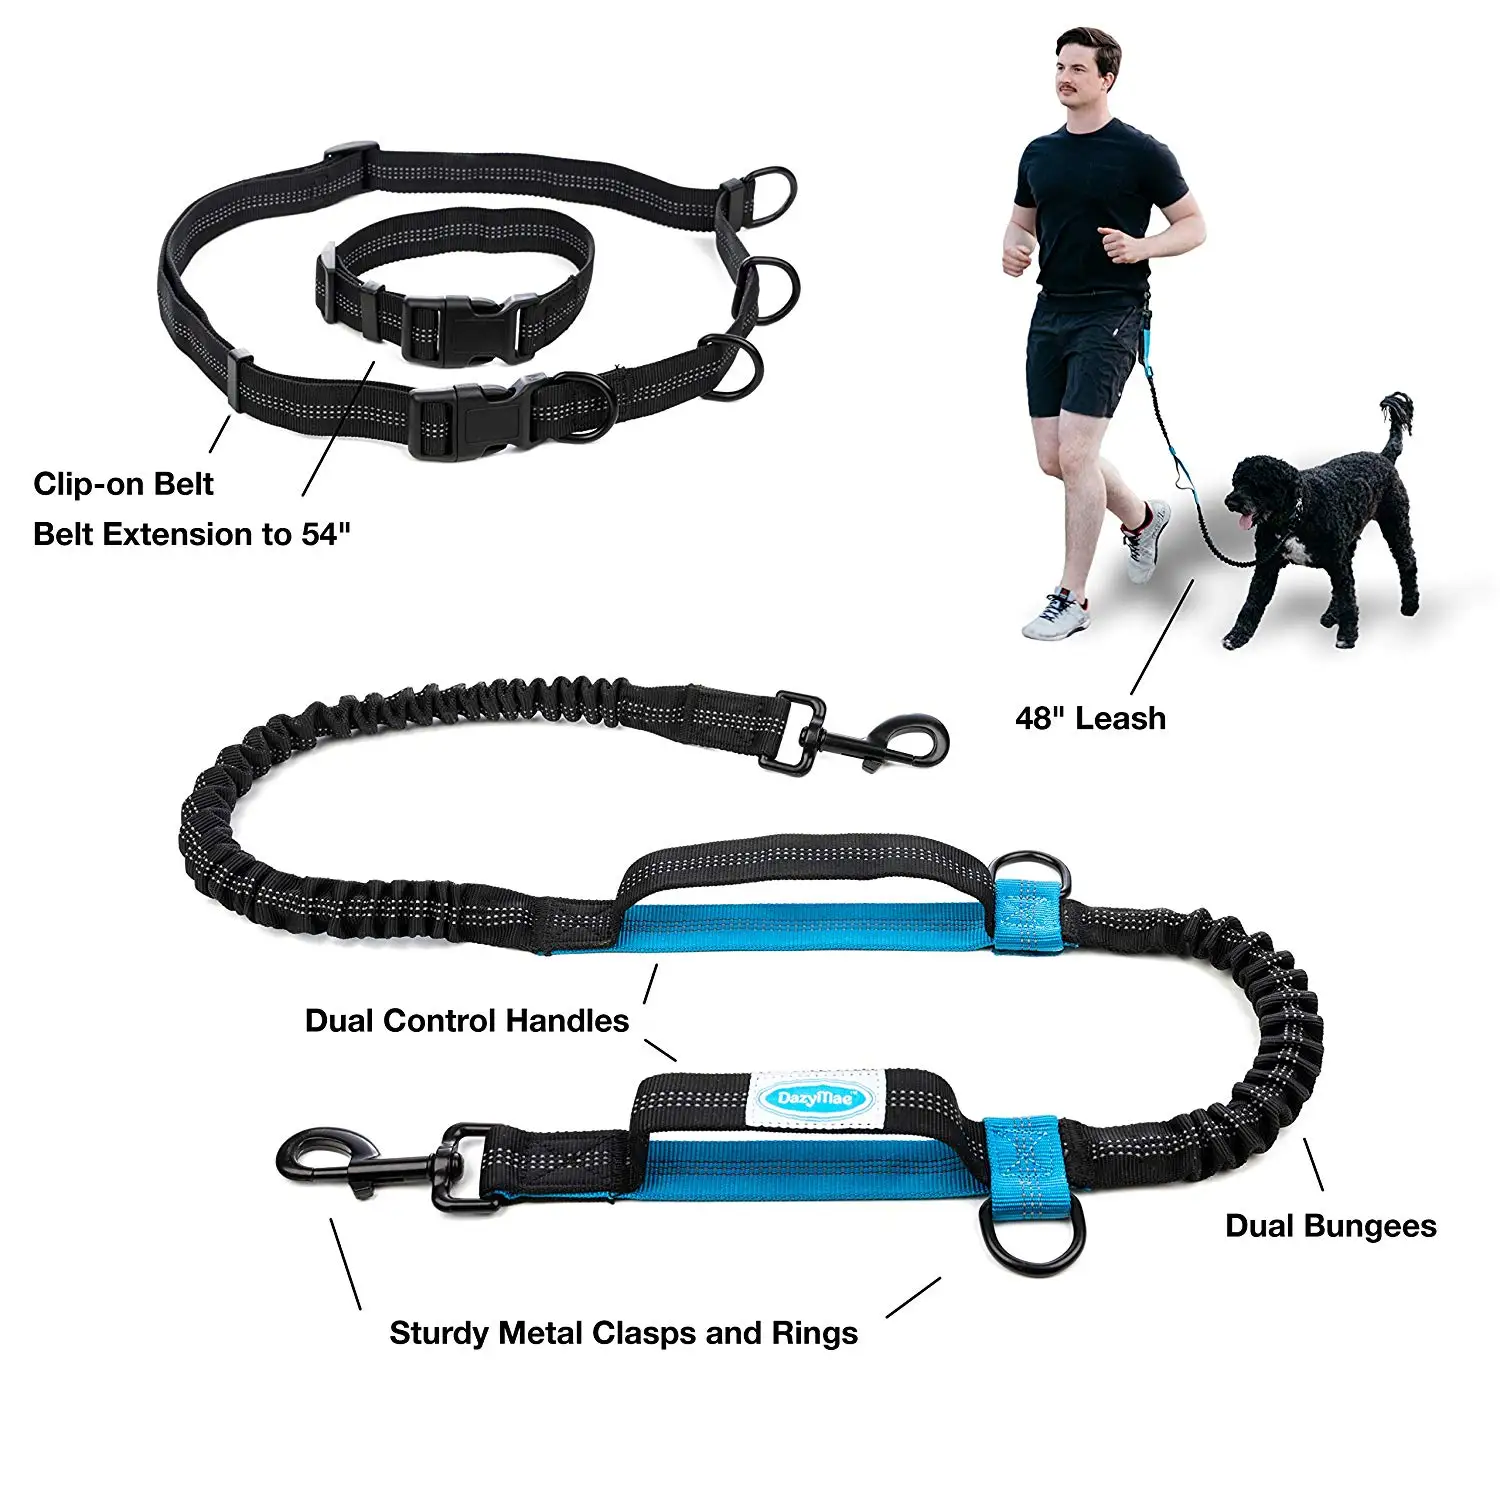 Reflective & Retractable Leashes Strong Bungee Leash Small Medium & Large Dogs Training Running Walking Leash Adjustable Waist Belt Poop Bag Holder TAKE YANKEE Hands Free Dog Leash 